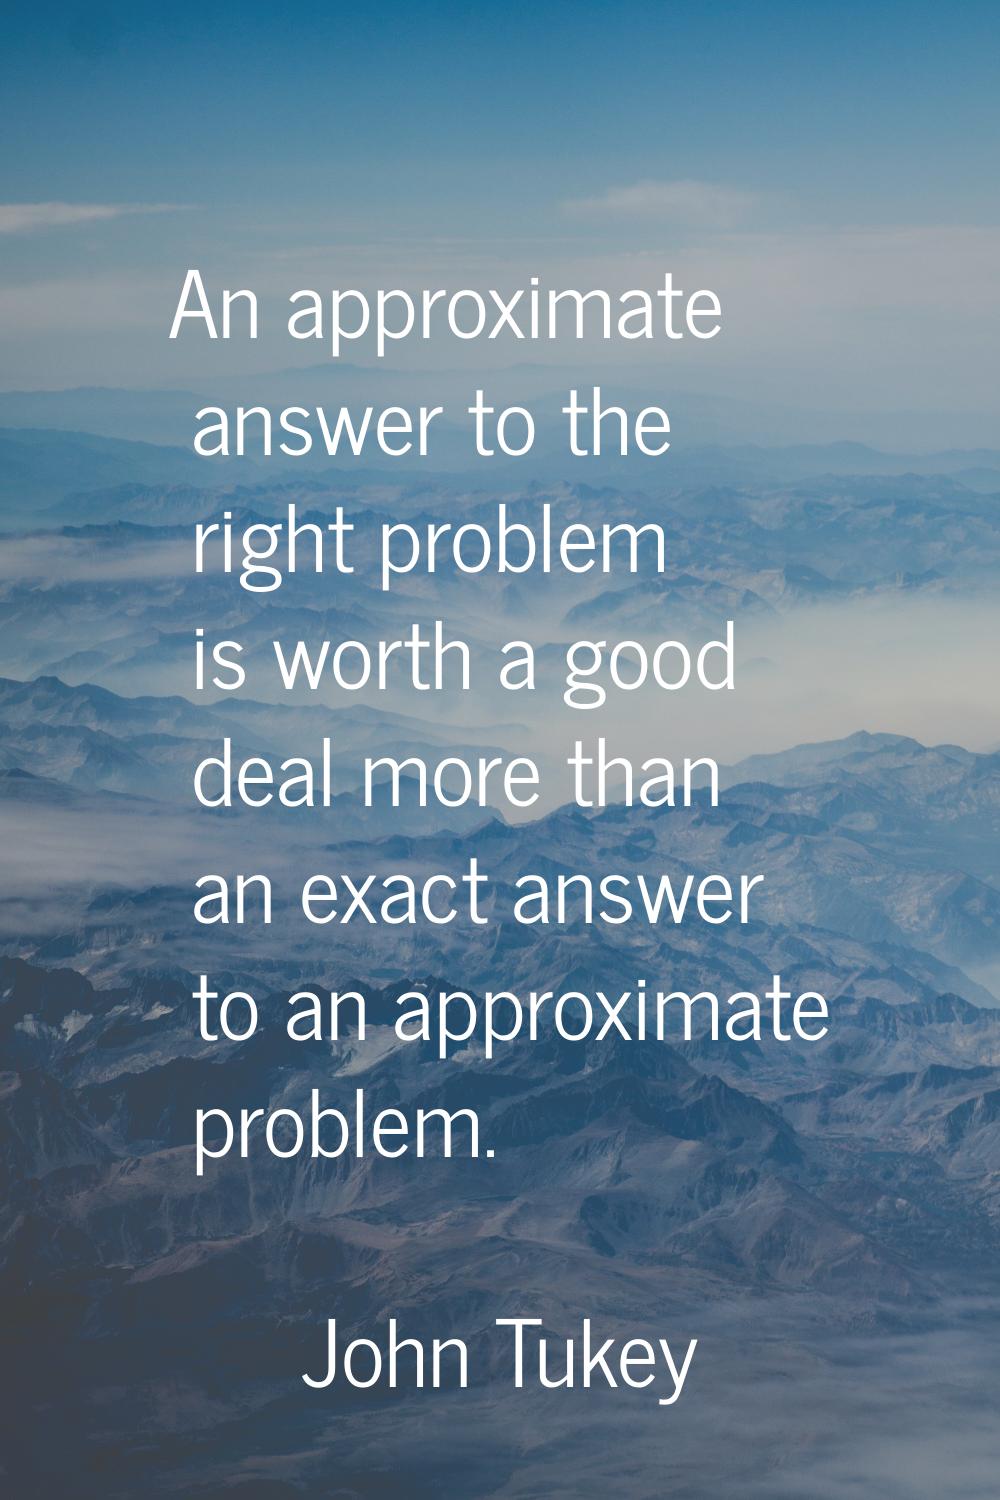 An approximate answer to the right problem is worth a good deal more than an exact answer to an app